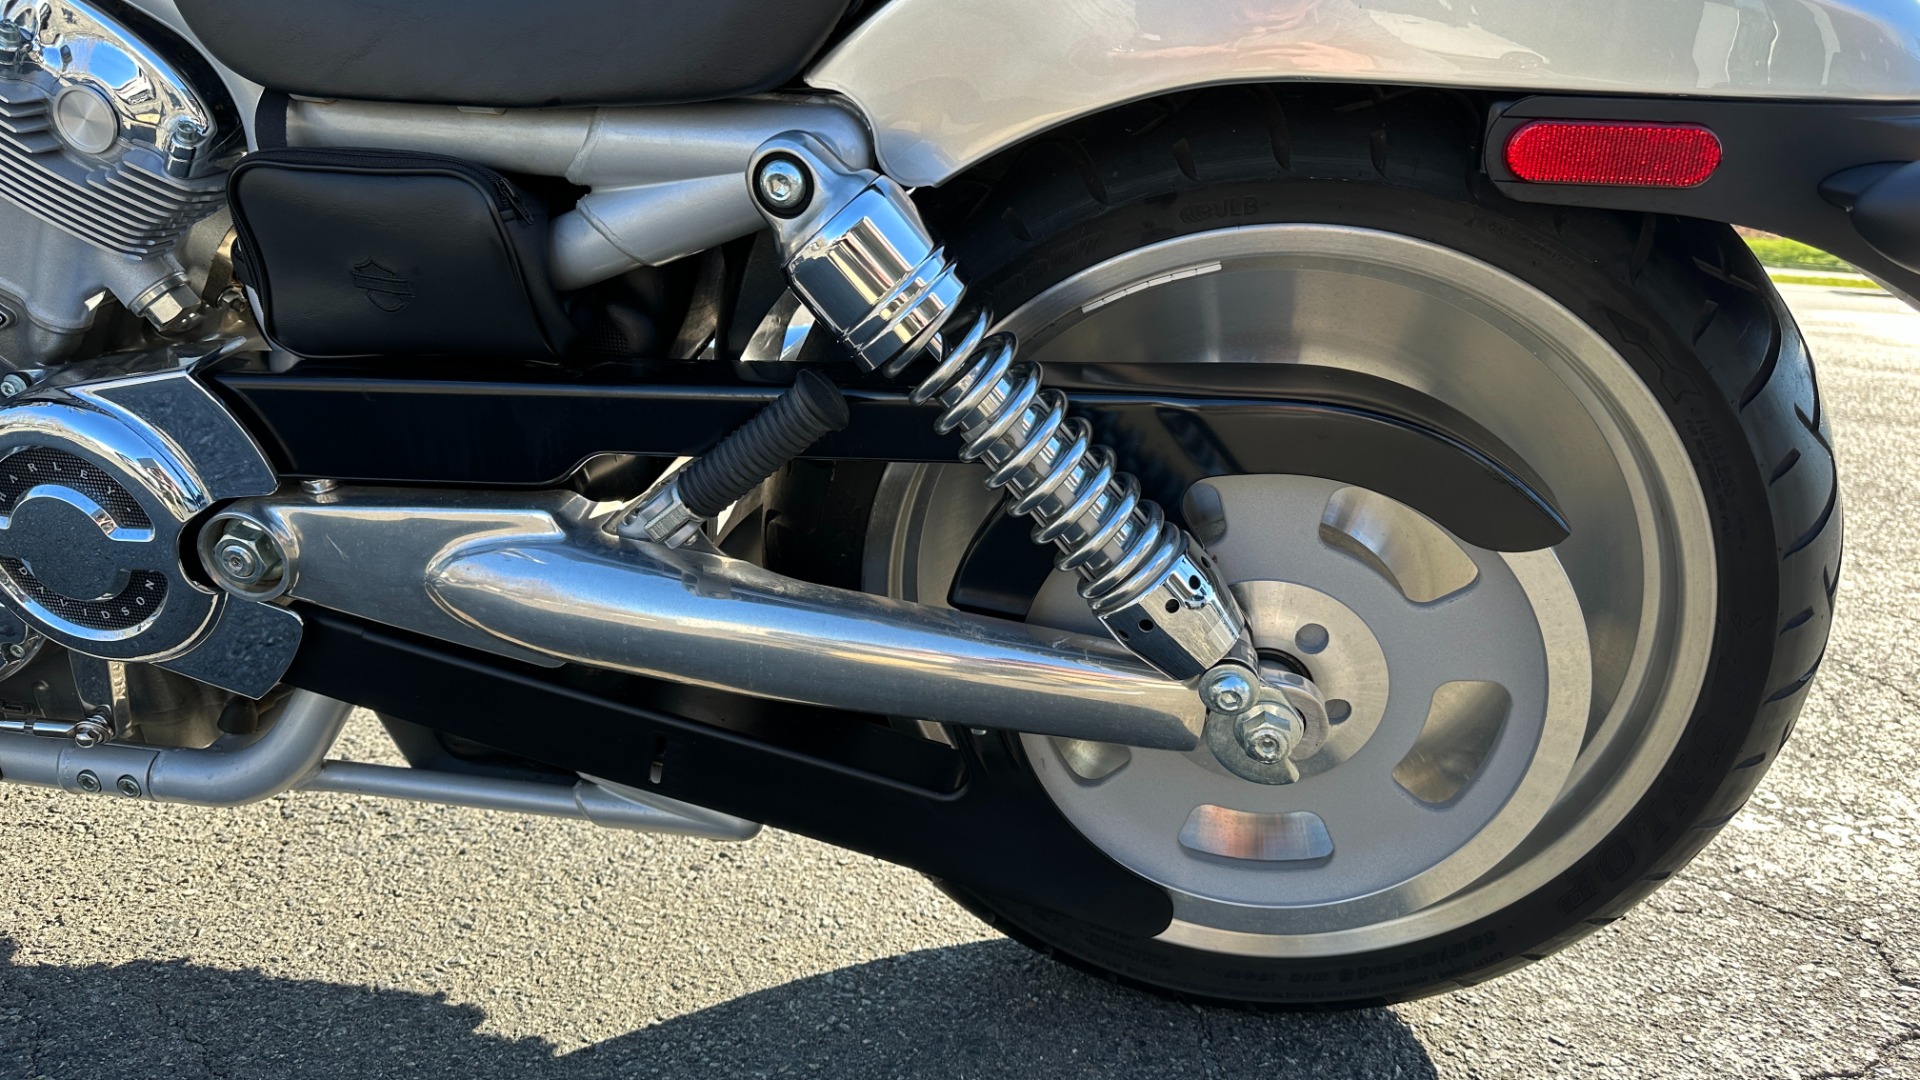 Used 2003 Harley Davidson V Rod ANNIVERSARY EDITION / 1130CC ENGINE / BREMBO BRAKES / VORTEX AIR SCOOPS for sale Sold at Formula Imports in Charlotte NC 28227 6